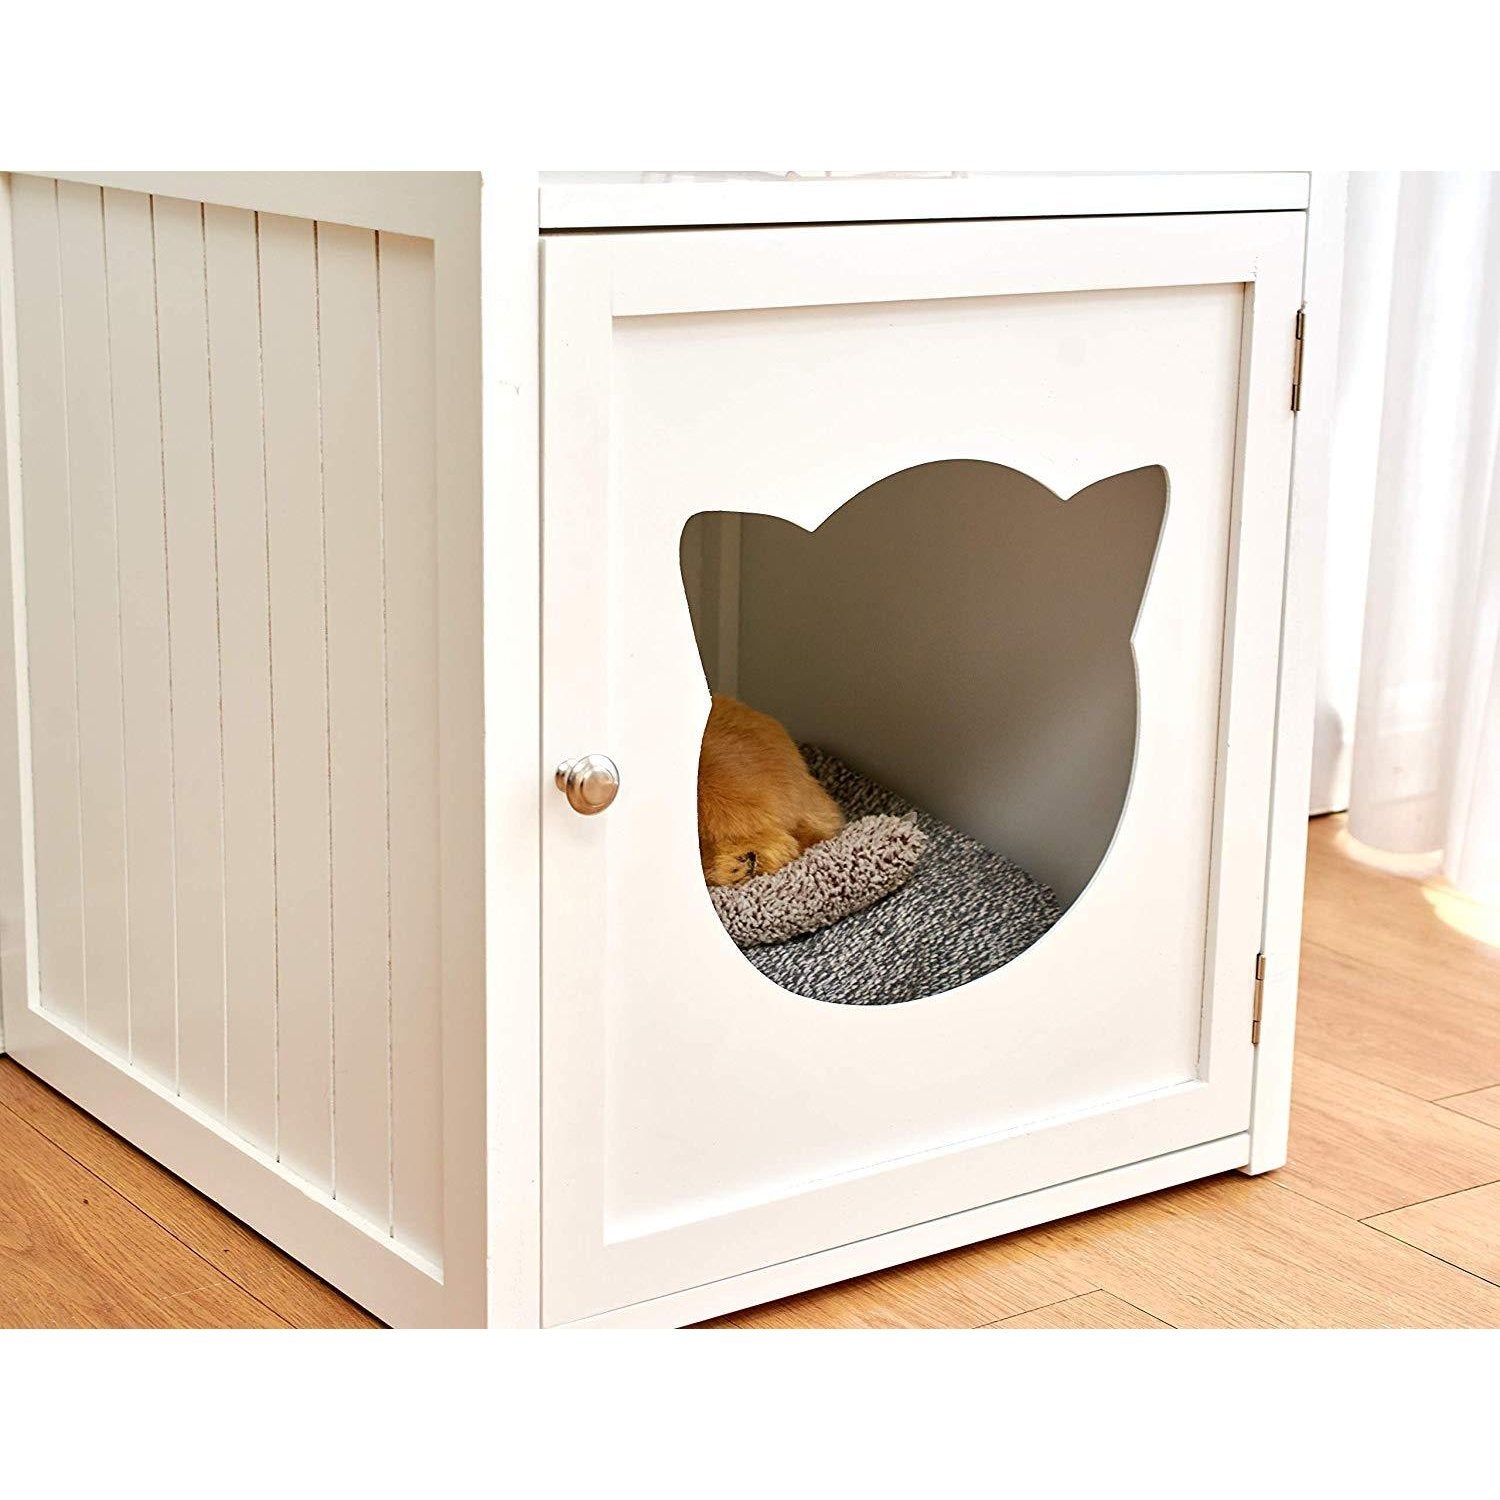 BASTET Wooden Cat Cave Bedside Cabinet Litter Box Cat House Nightstand White